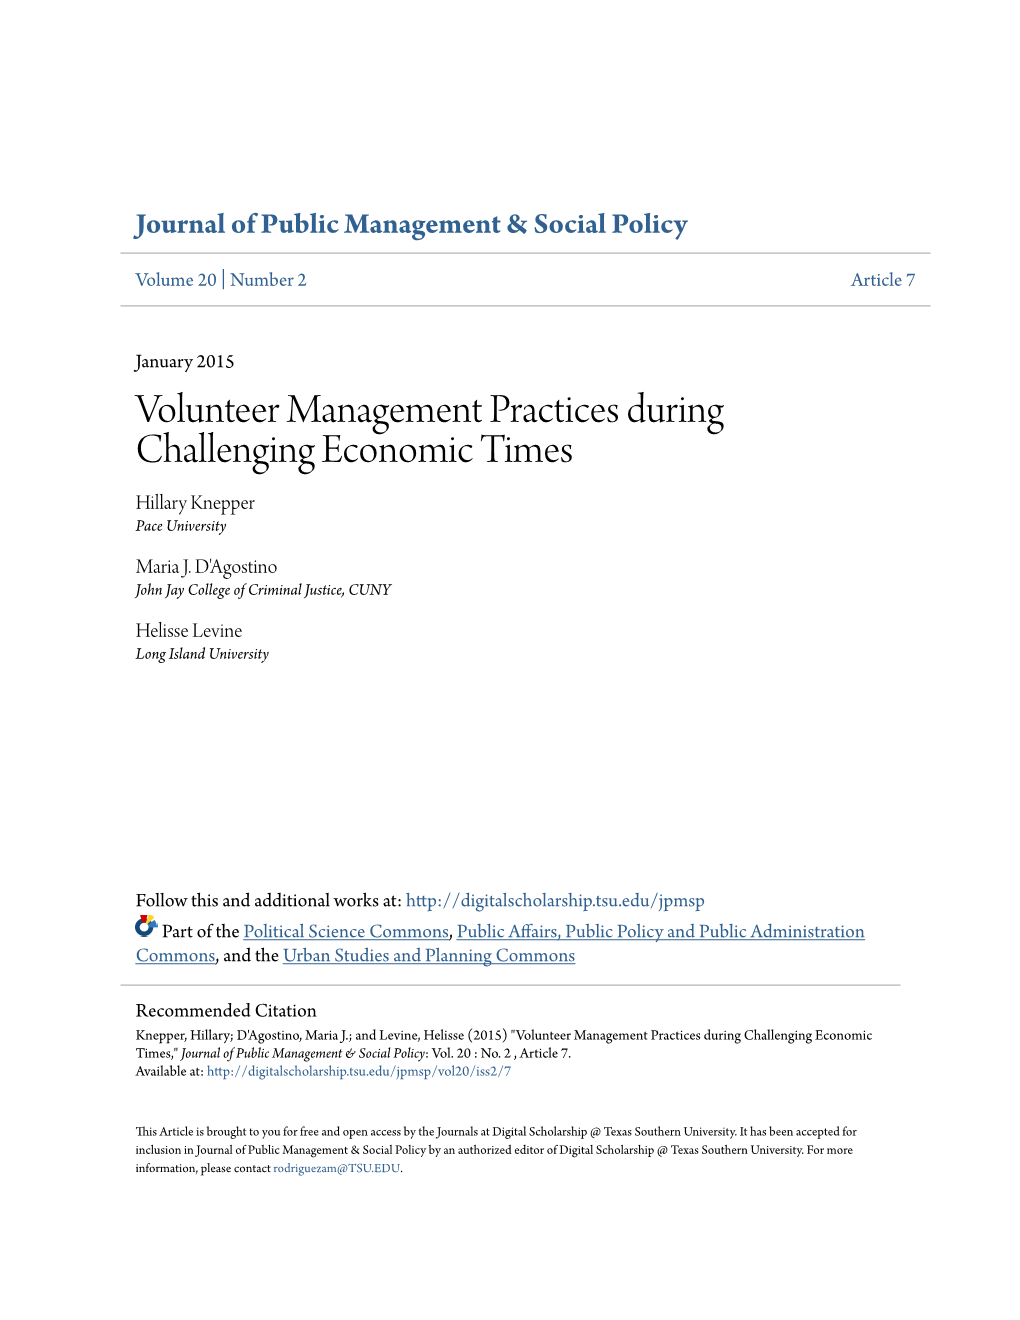 Volunteer Management Practices During Challenging Economic Times Hillary Knepper Pace University